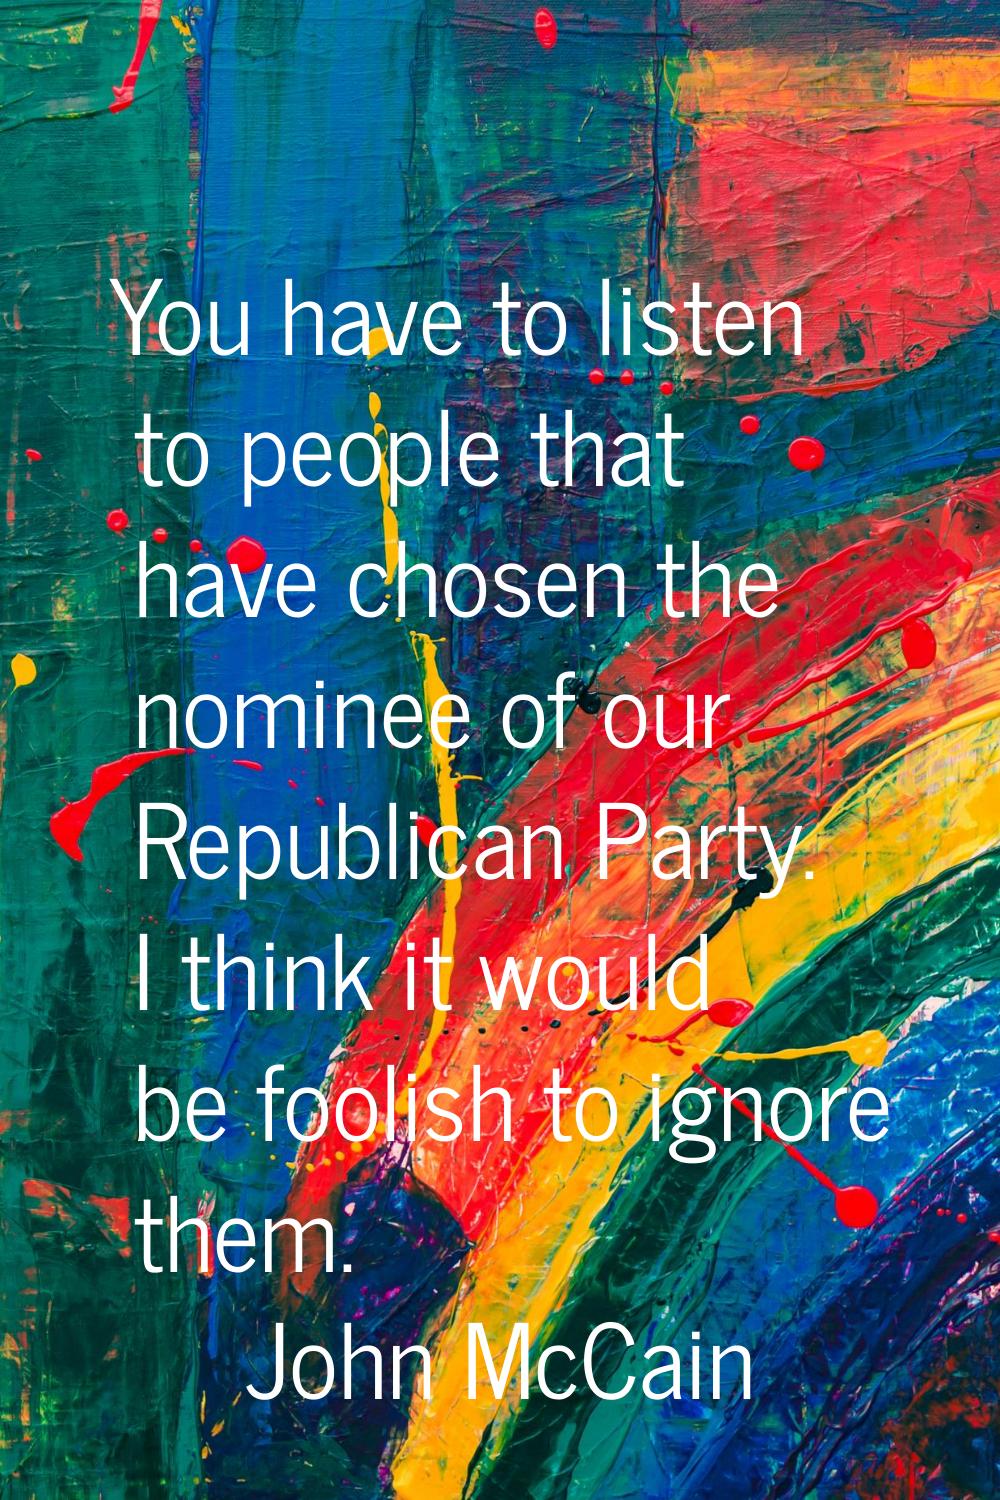 You have to listen to people that have chosen the nominee of our Republican Party. I think it would